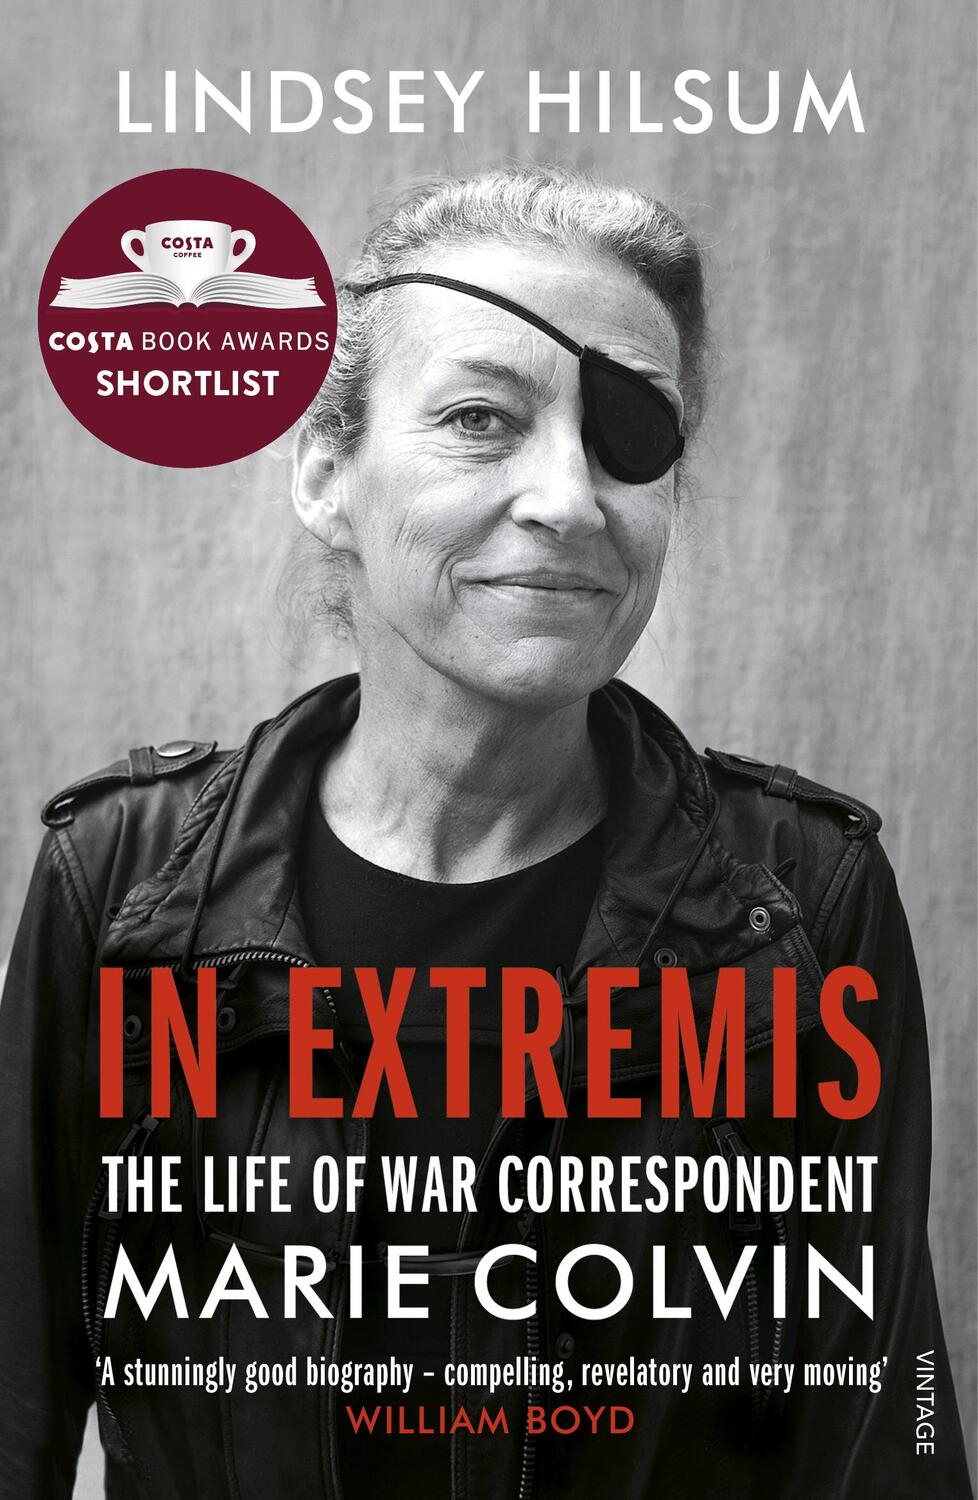 Cover: 9781784703950 | In Extremis | The Life of War Correspondent Marie Colvin | Hilsum